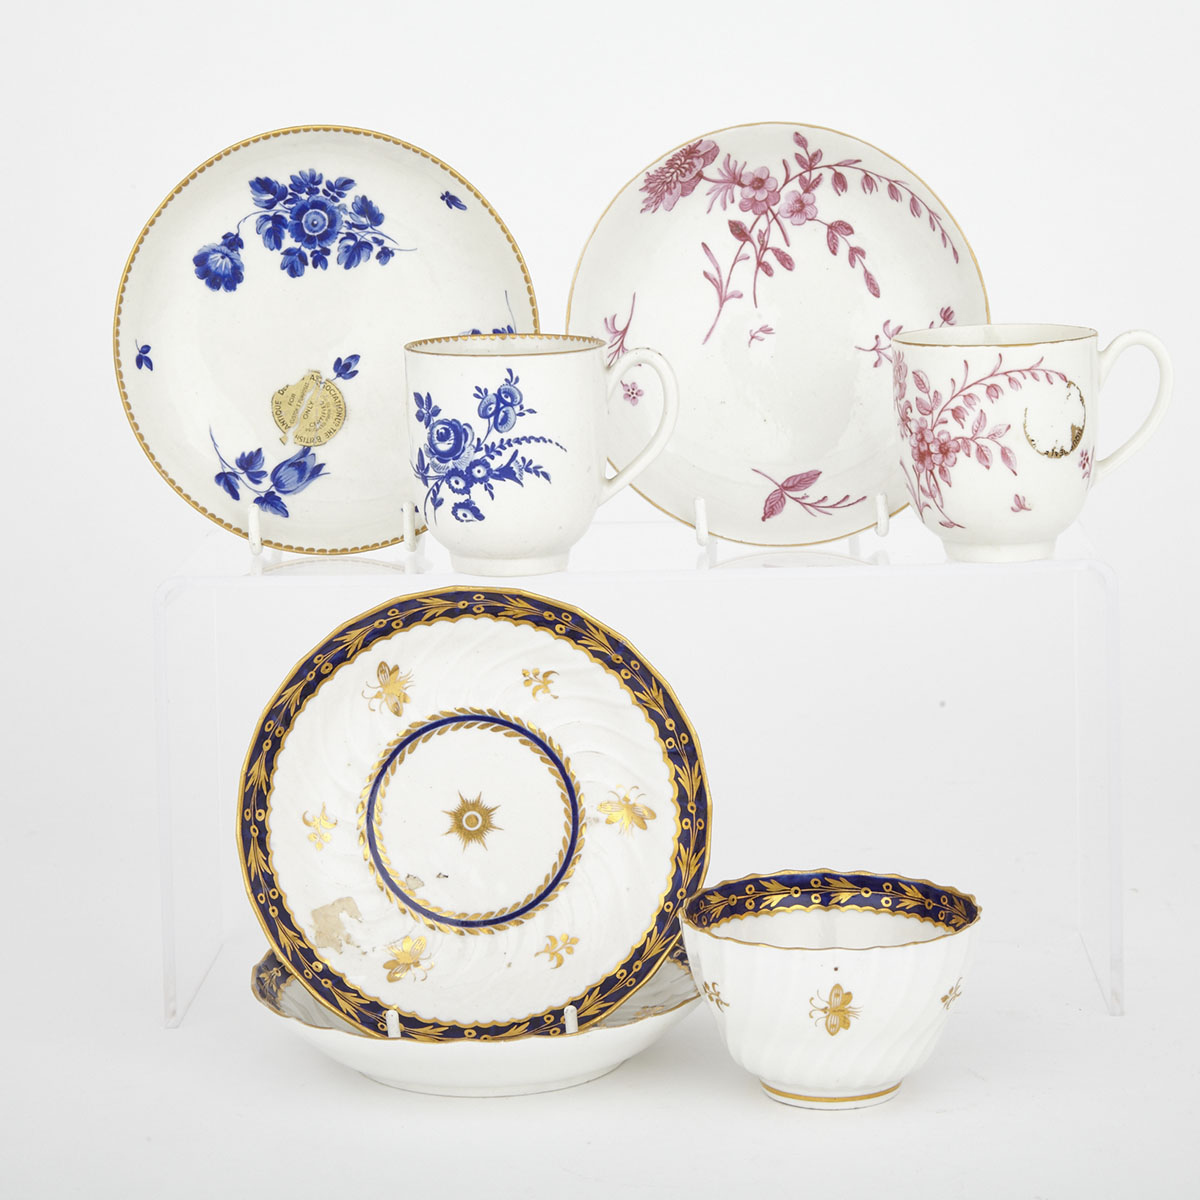 Two Worcester Coffee Cups and Saucers, Fluted Blue and Gilt Tea Bowl and Two Saucers, c.1770-90